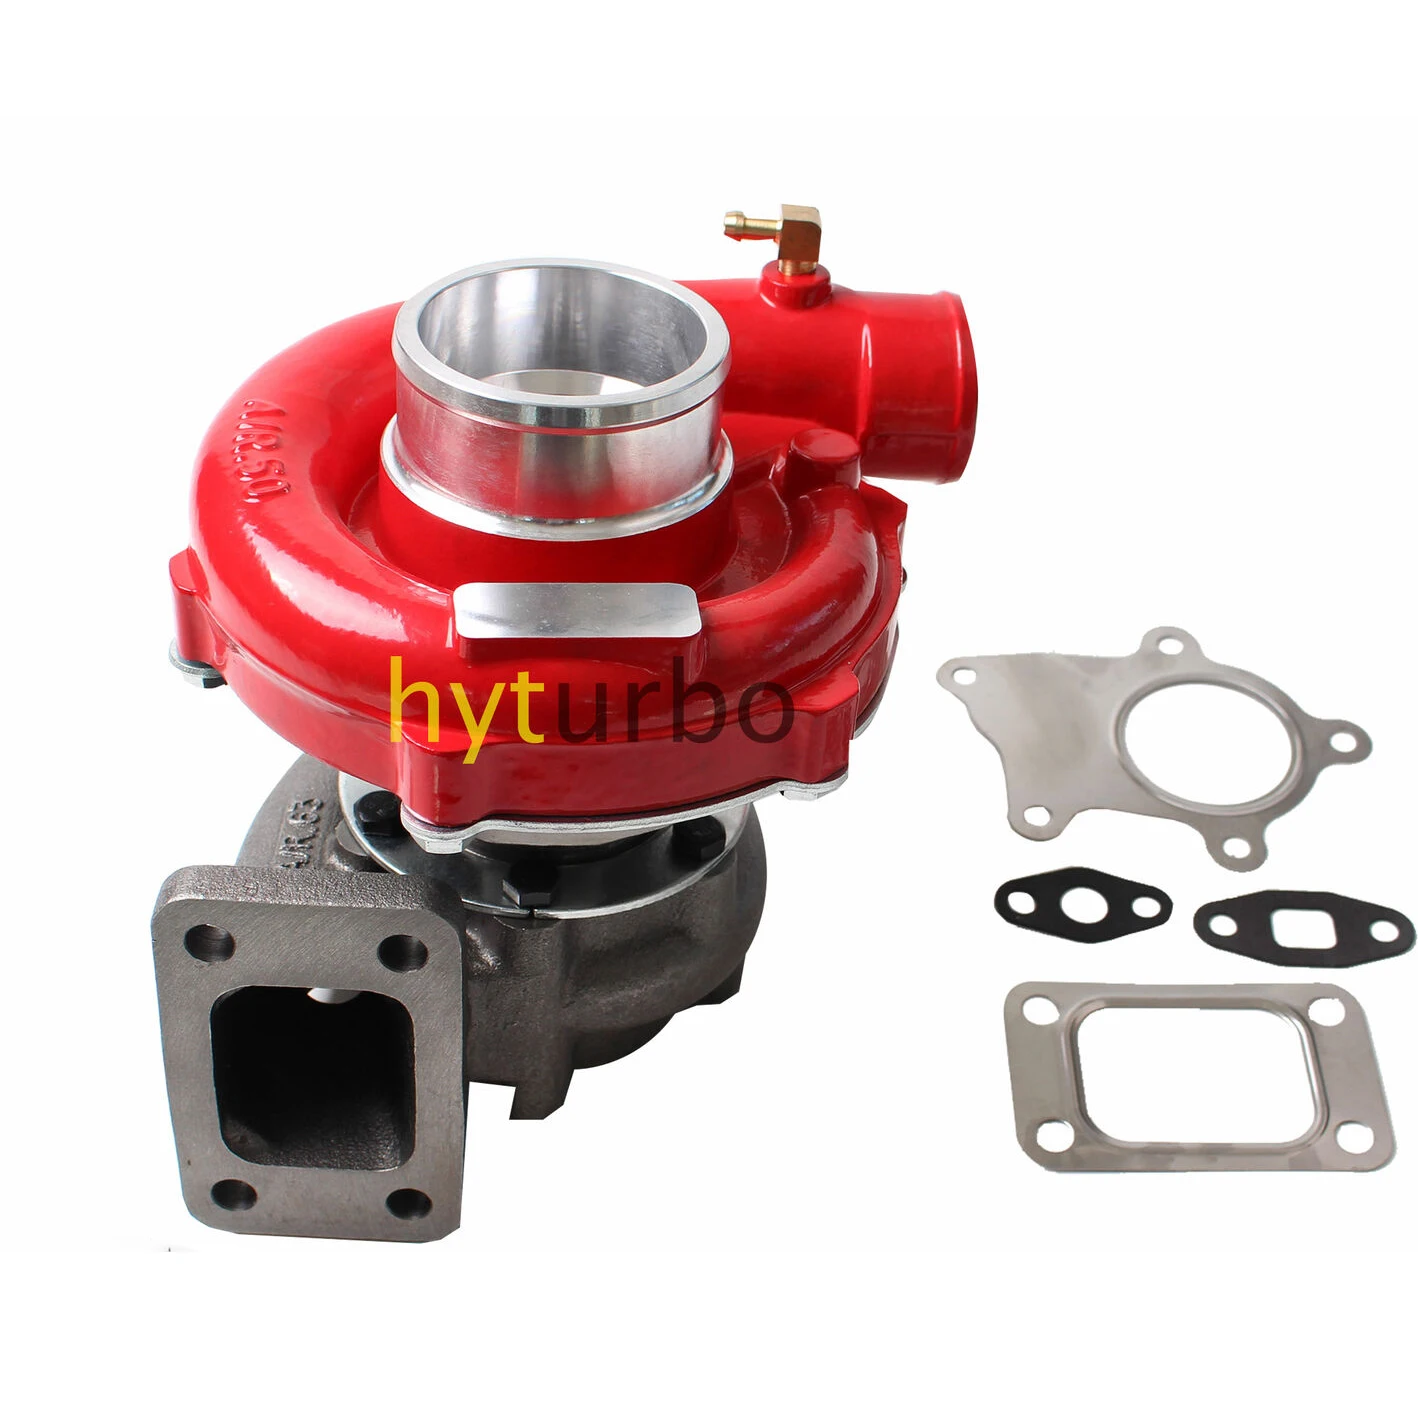 Turbo Turbocharger T3/t4 T3t4 T04e .63 A/r Turbine 5 Bolt Red Housing  Universal Turbo Charger Supercharger - Buy T3/t4 Turbocharger,T04e  Turbocharger,Universal Turbocharger Product on 